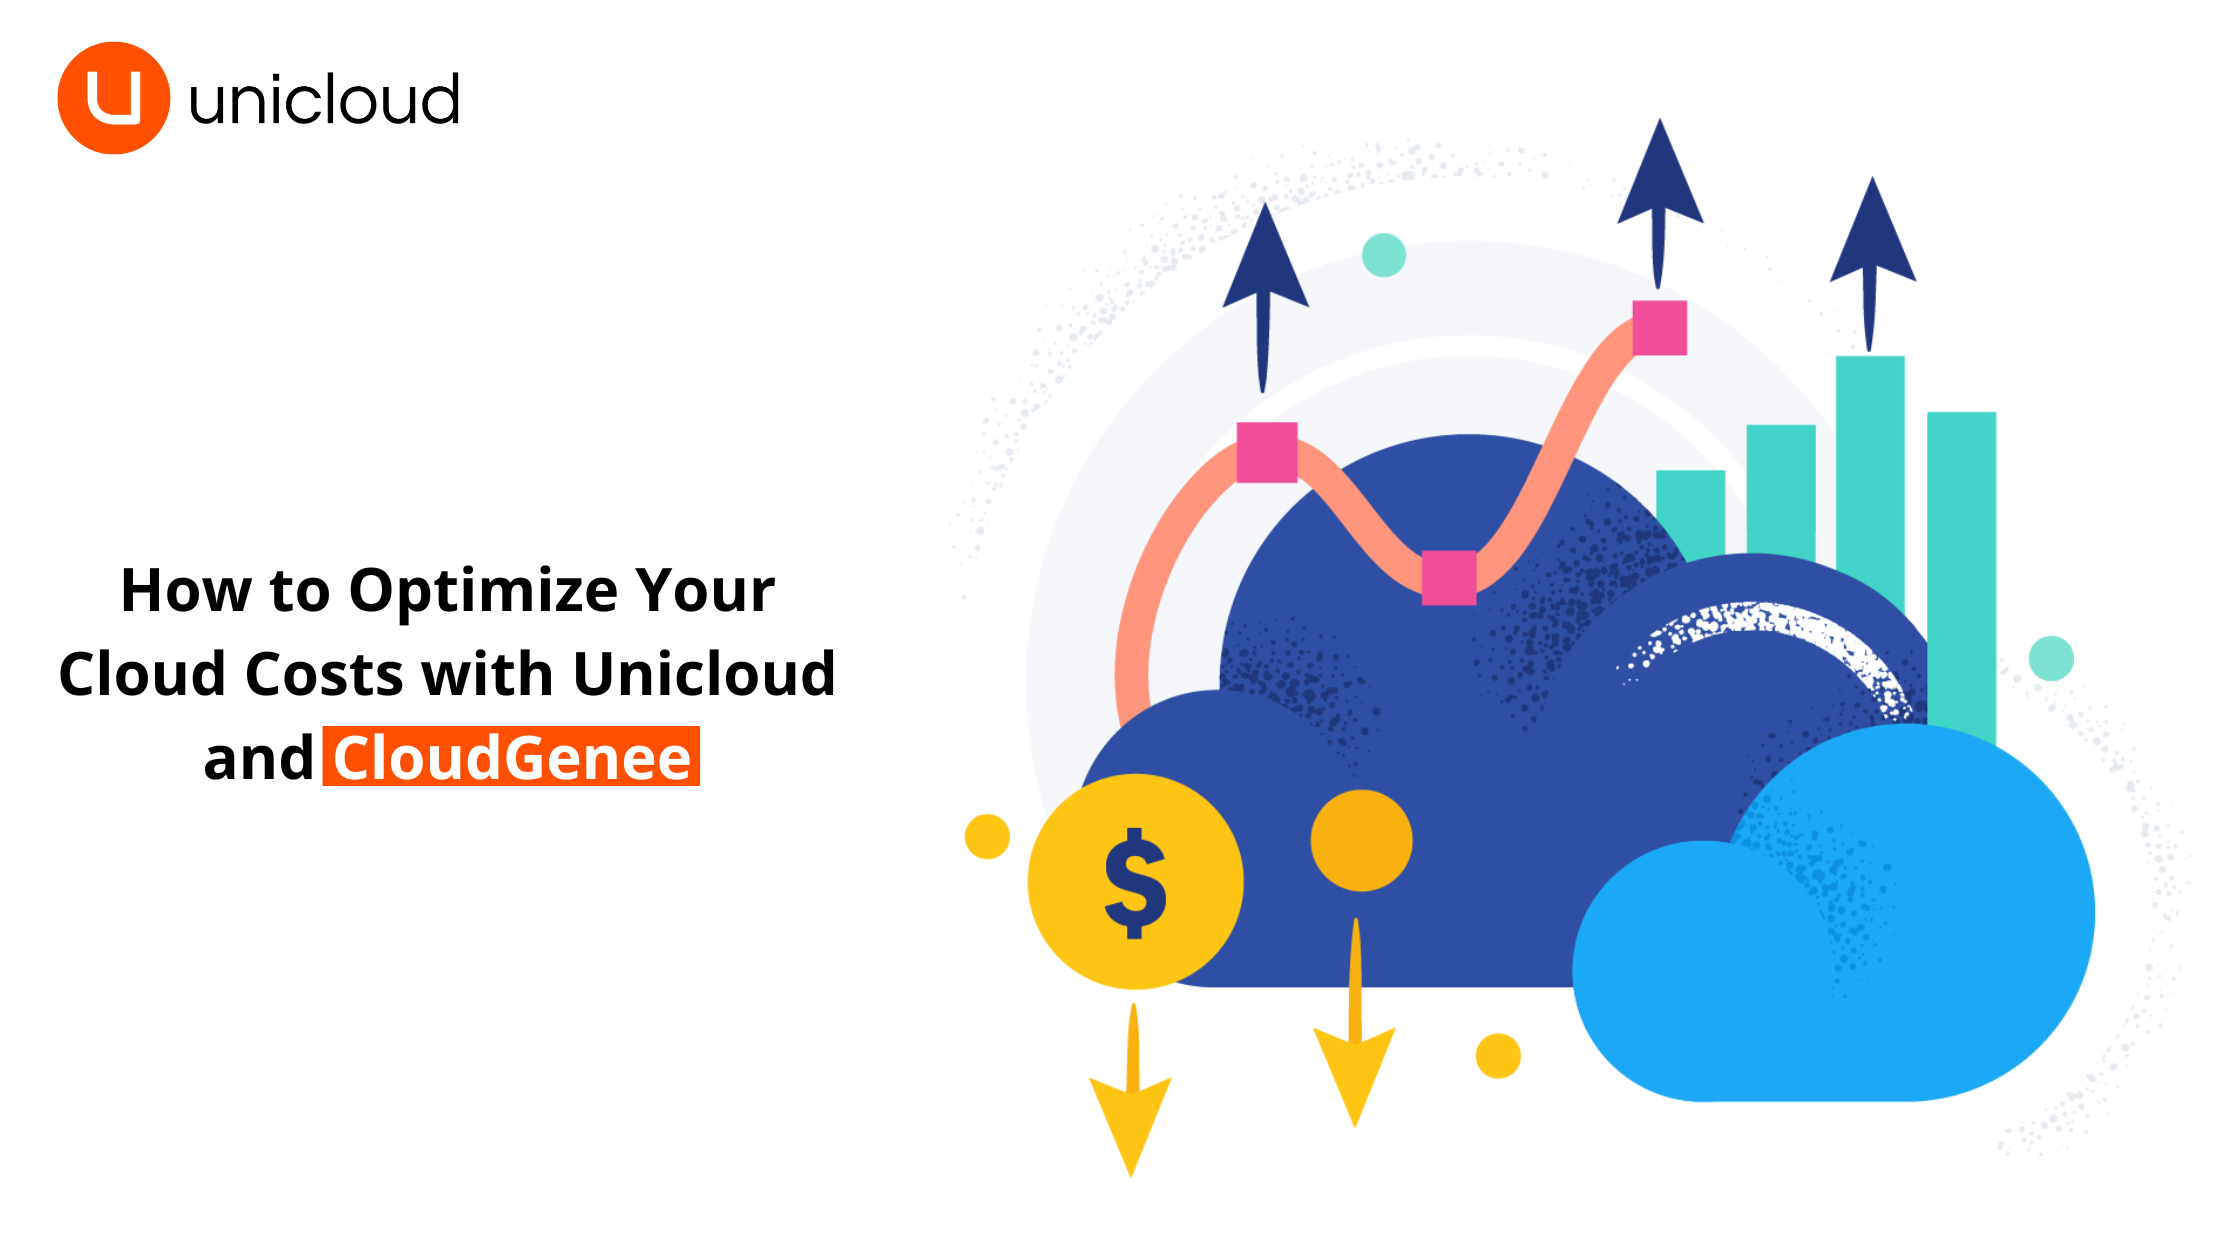 How to Optimize Your Cloud Costs with Unicloud and CloudGenee